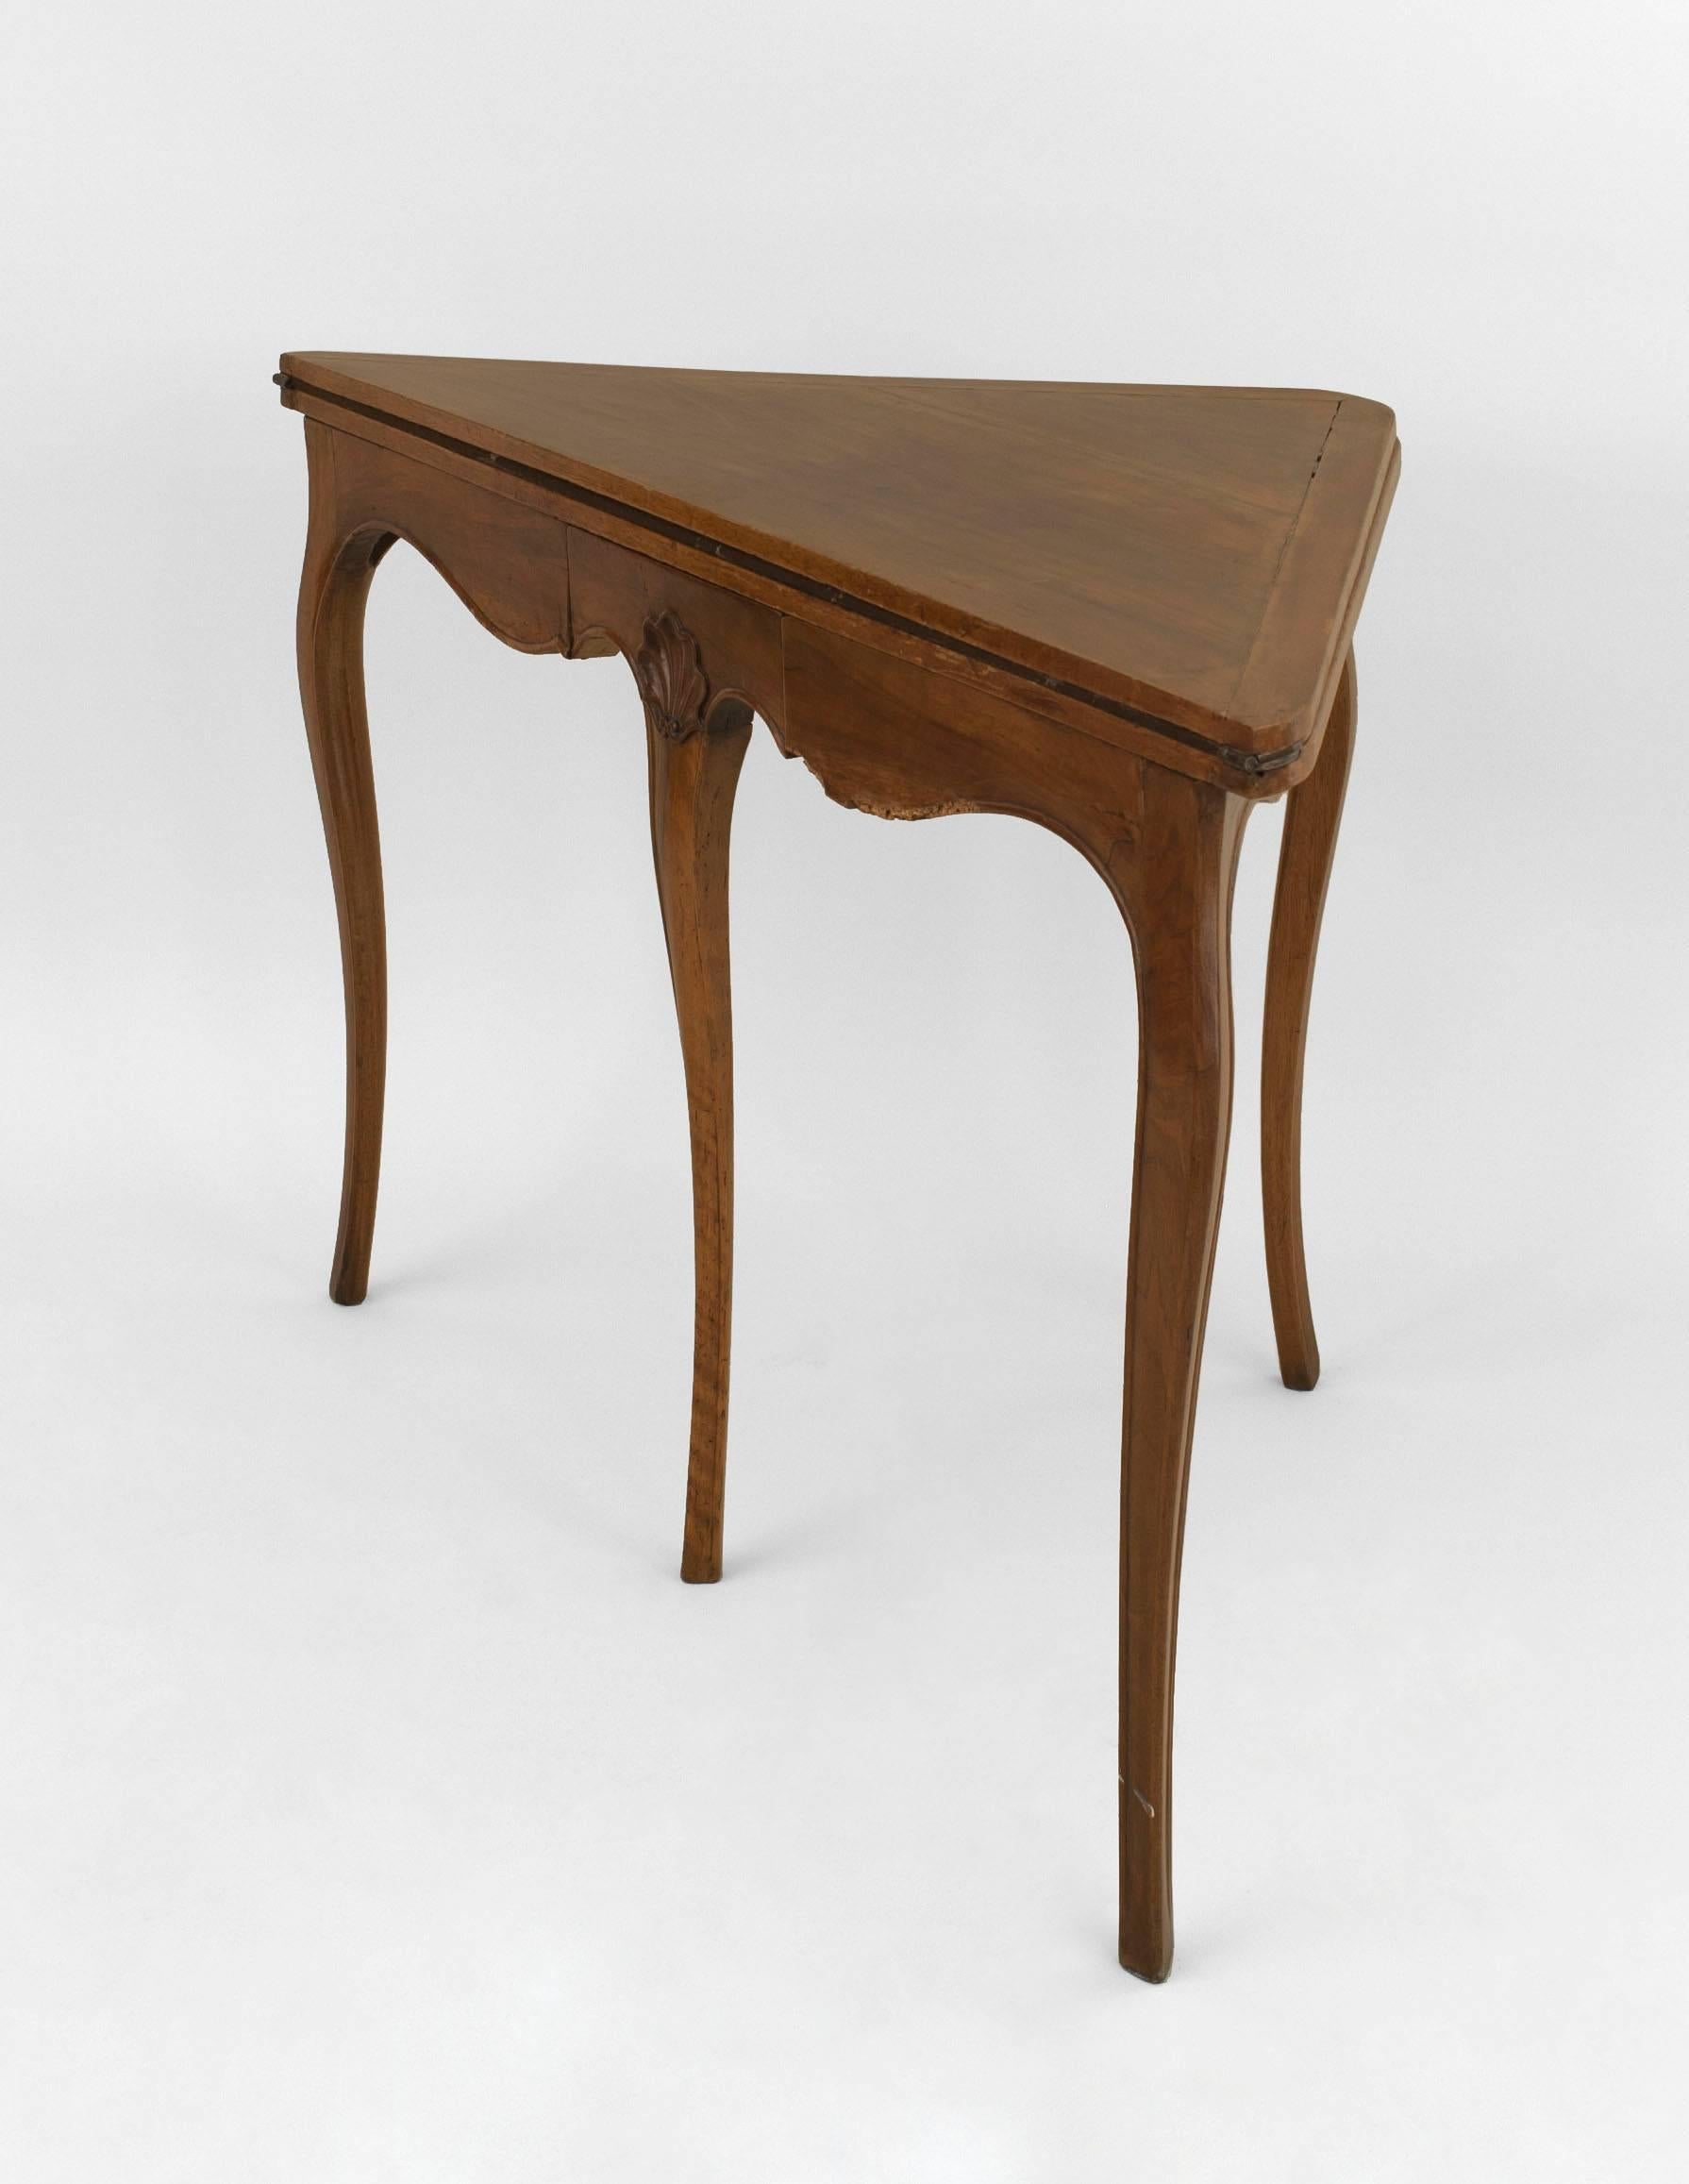 French Provincial Louis XV style (19th Century) fruitwood 3 leg console table which opens into a square game table on cabriole legs with a felt inset top.
